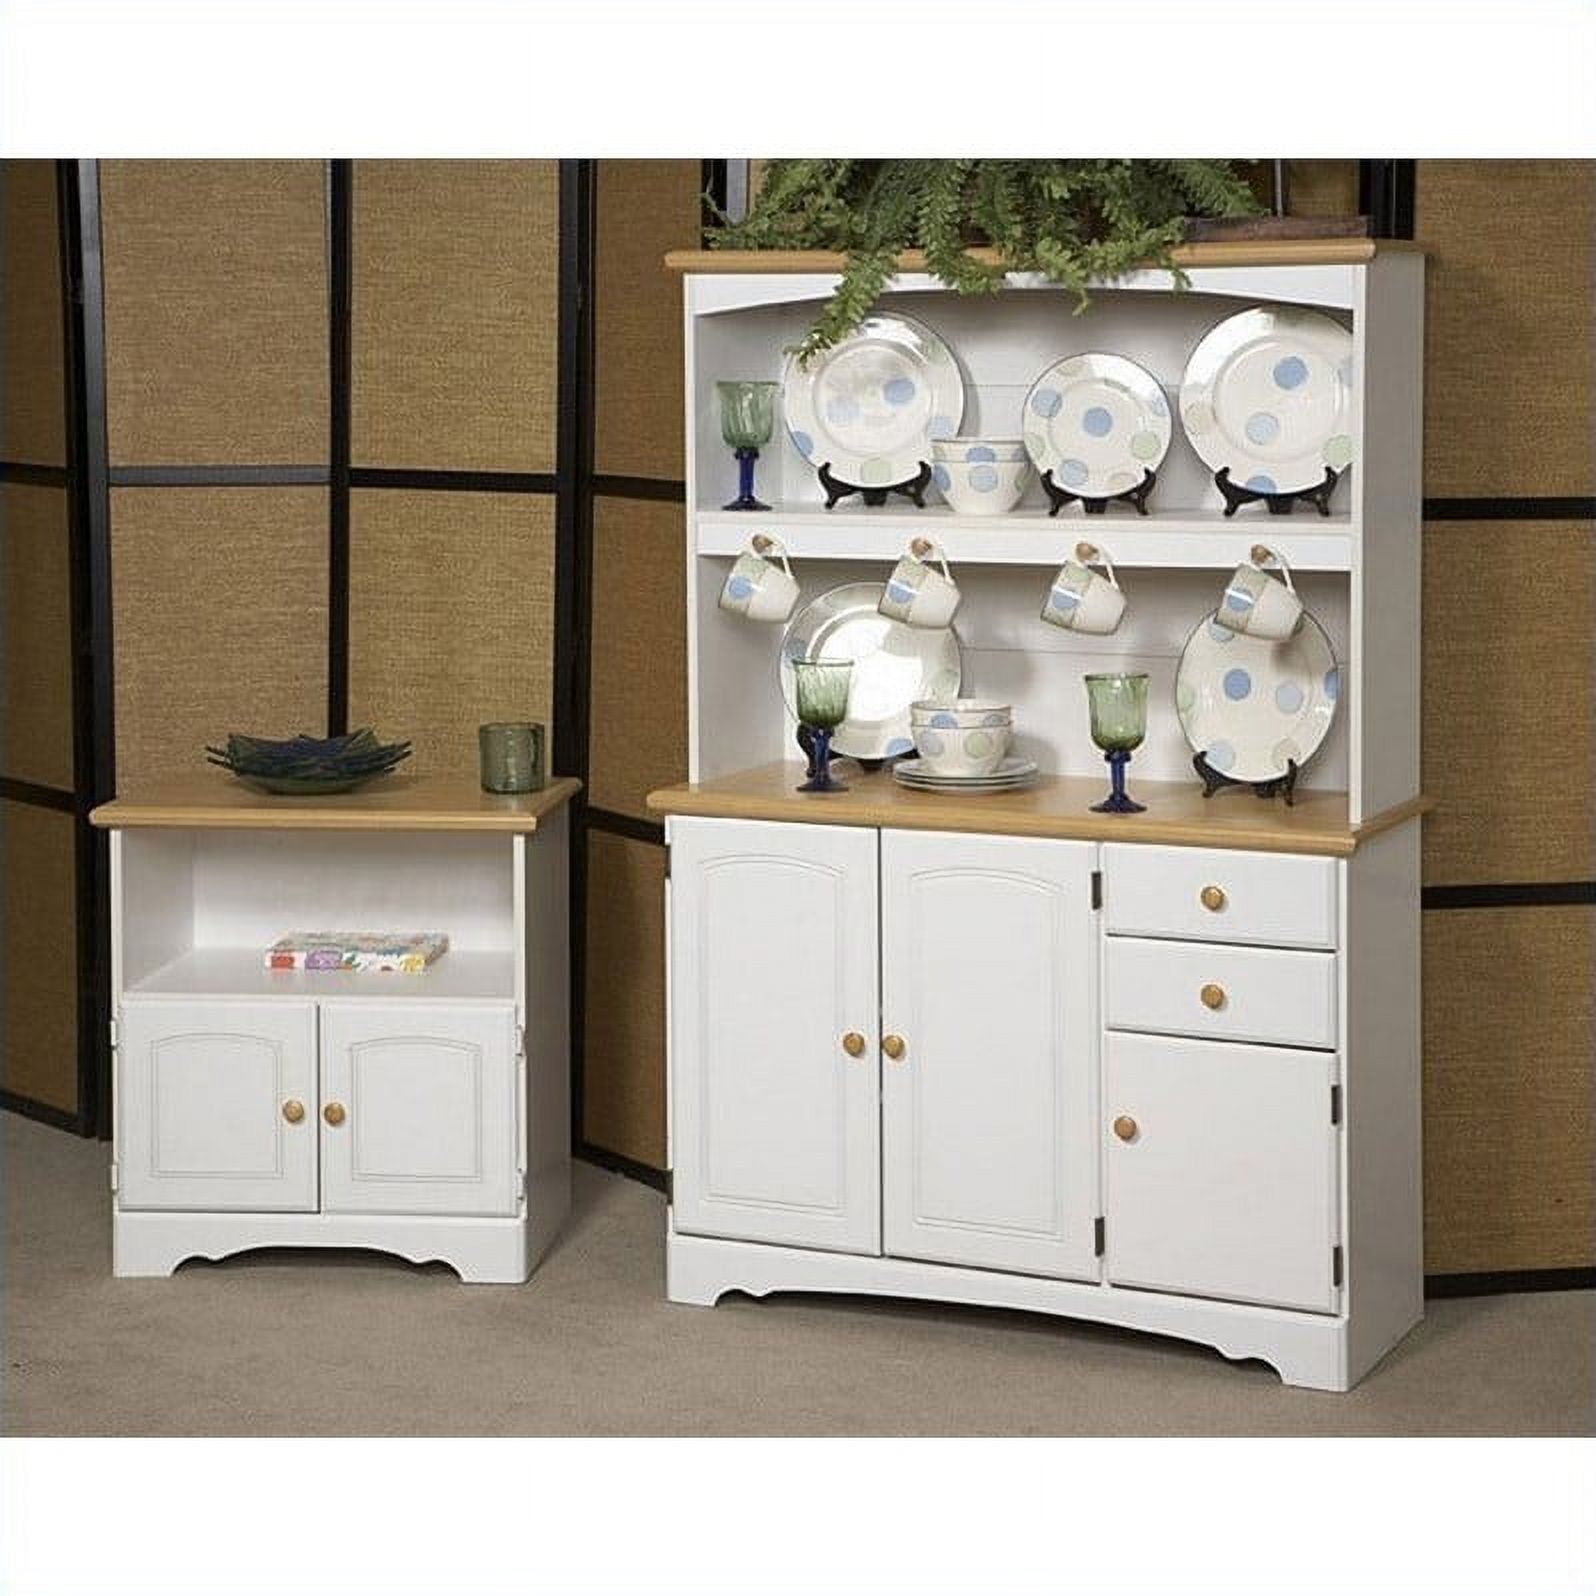 Homestar Lane Furniture Kitchen Hutch with 4 Knobs in White - image 2 of 2